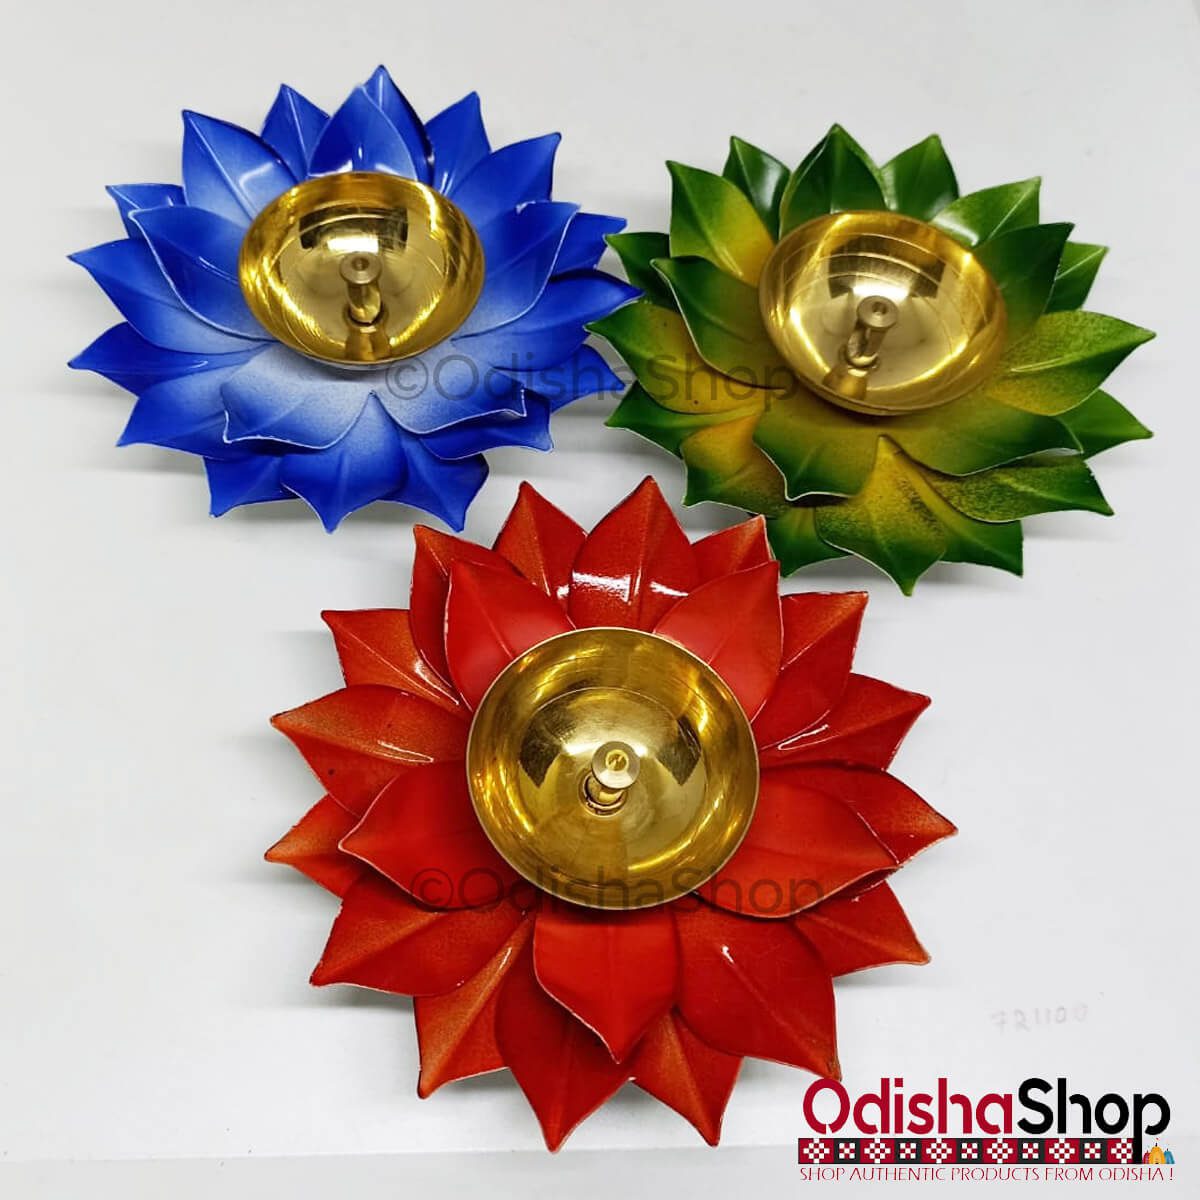 You are currently viewing Brass Lotus Design Diya For Puja